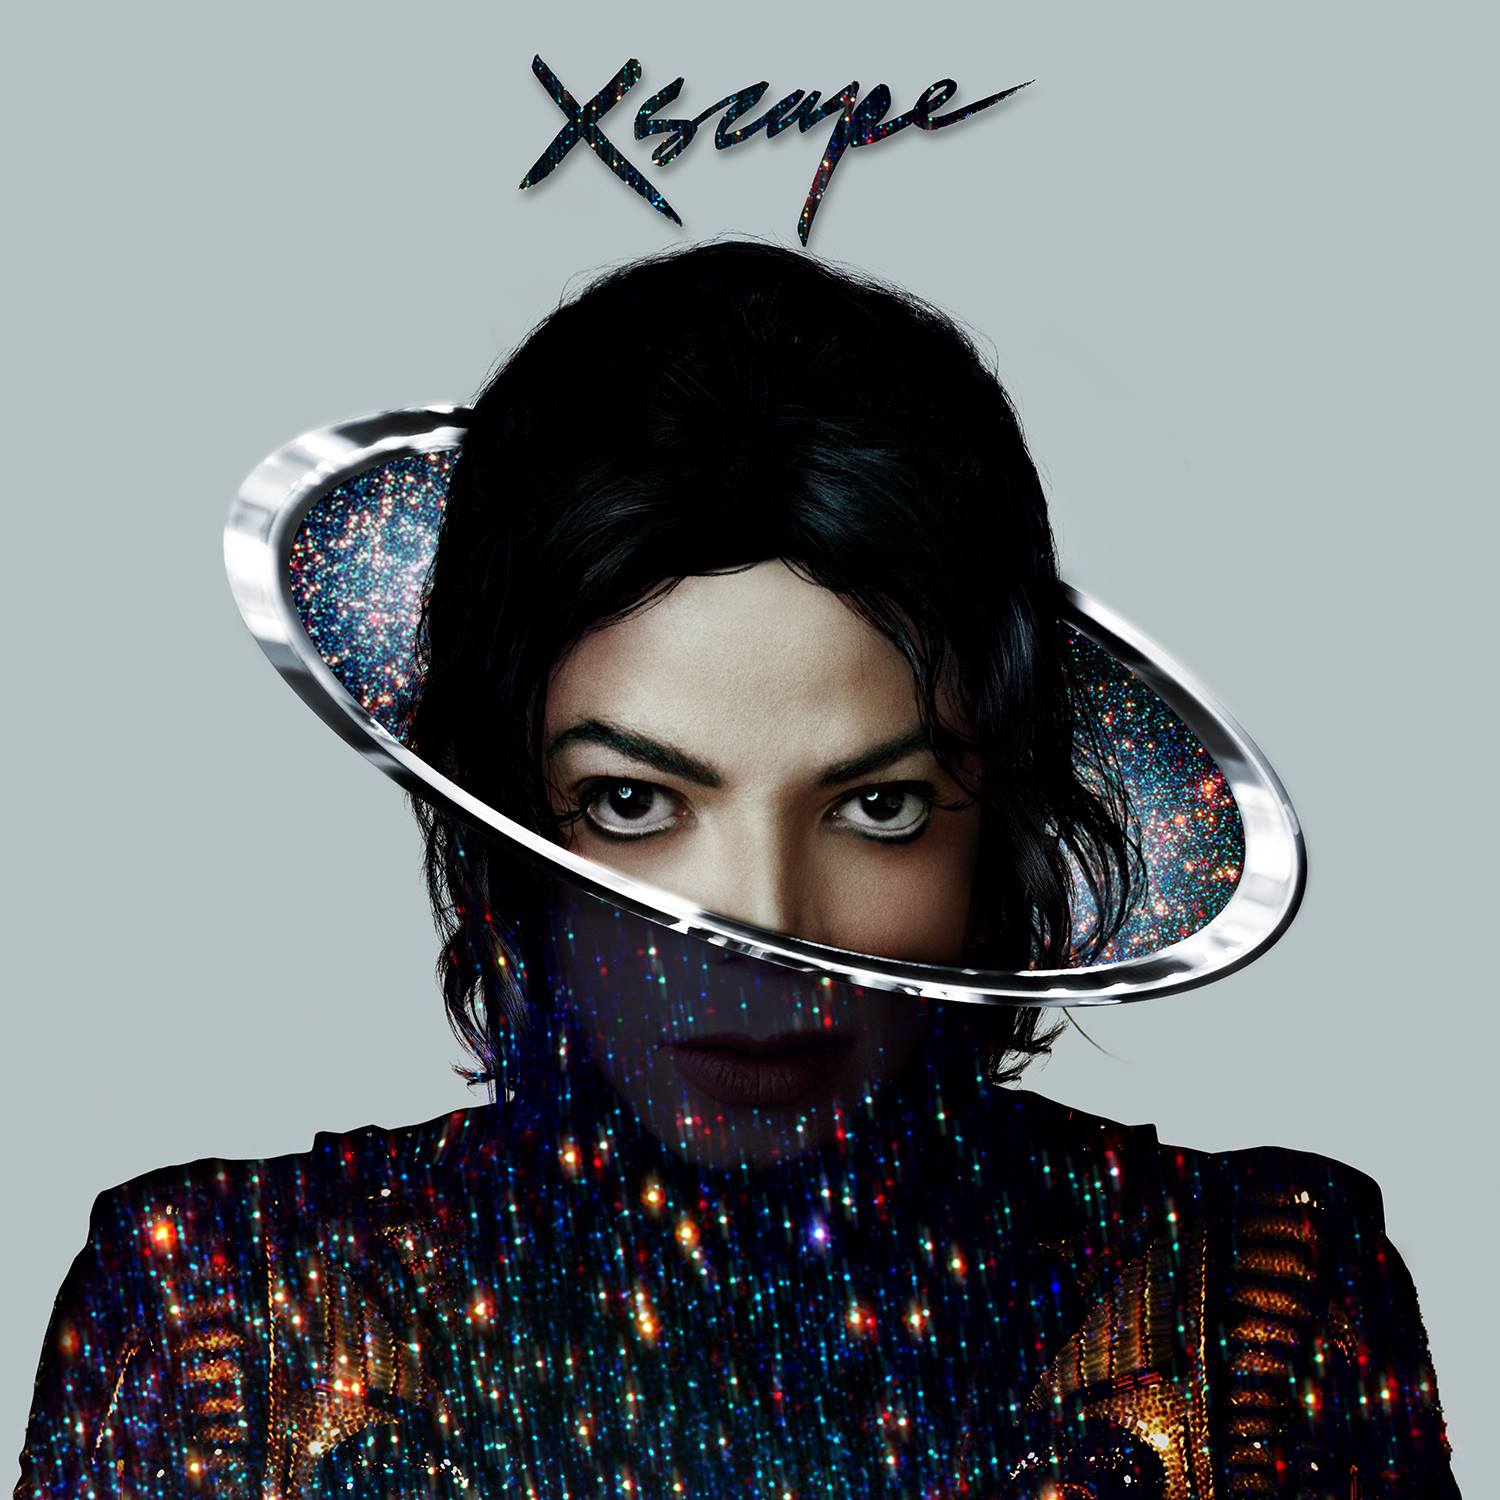 Michael Jacksons Xscape: Track-By-Track Review Billboard